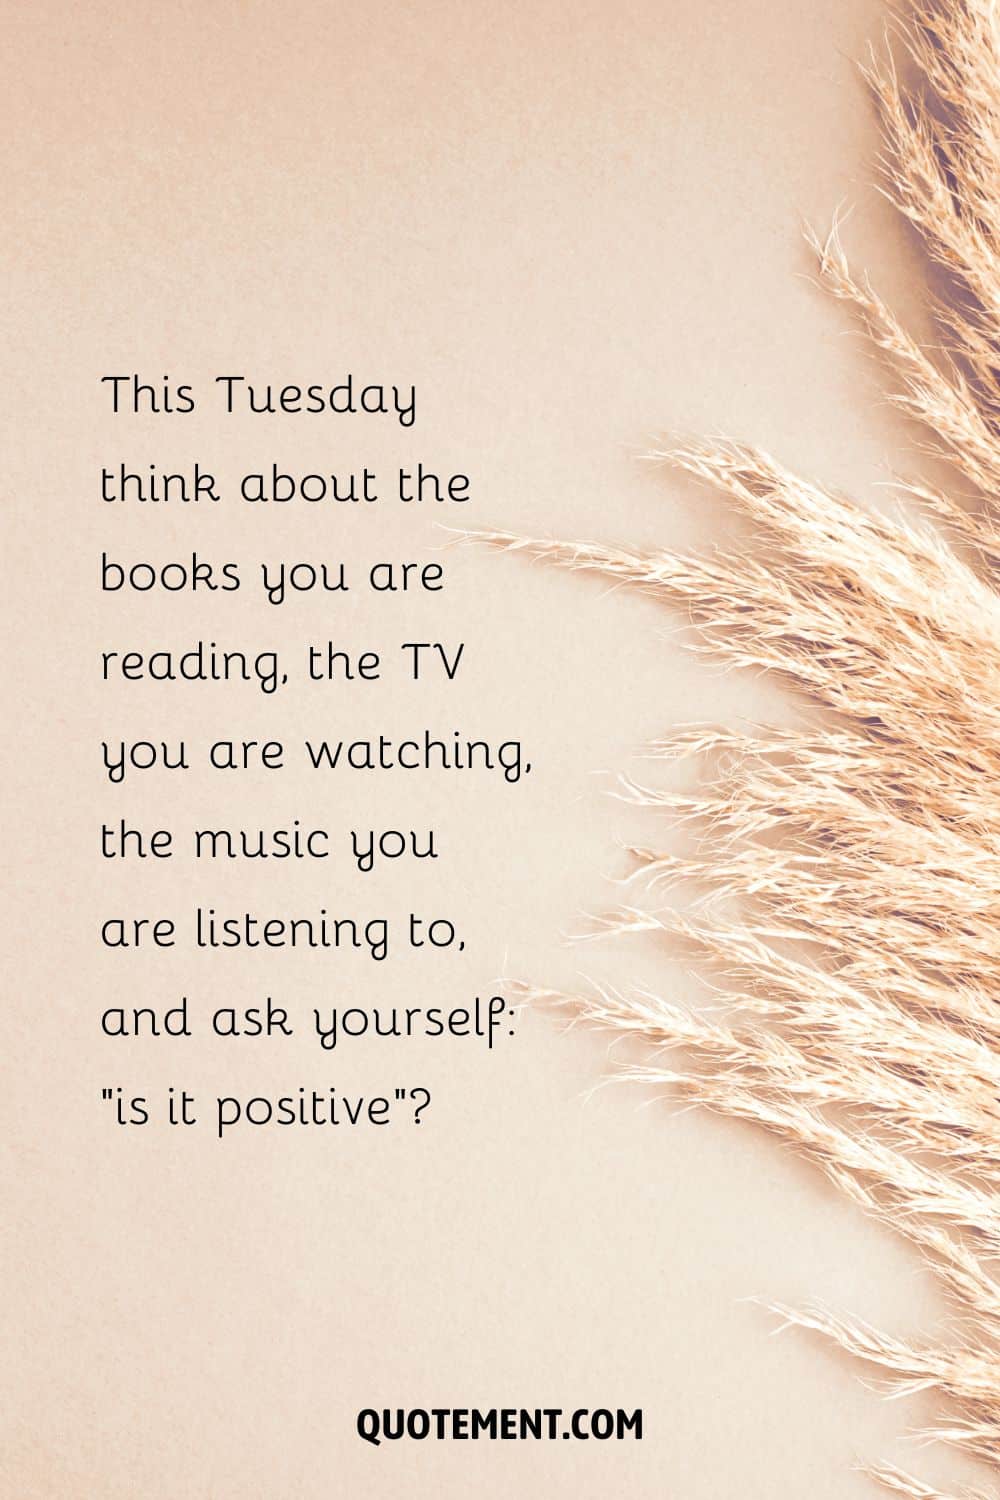 “This Tuesday think about the books you are reading, the TV you are watching, the music you are listening to, and ask yourself “is it positive”” — Unknown